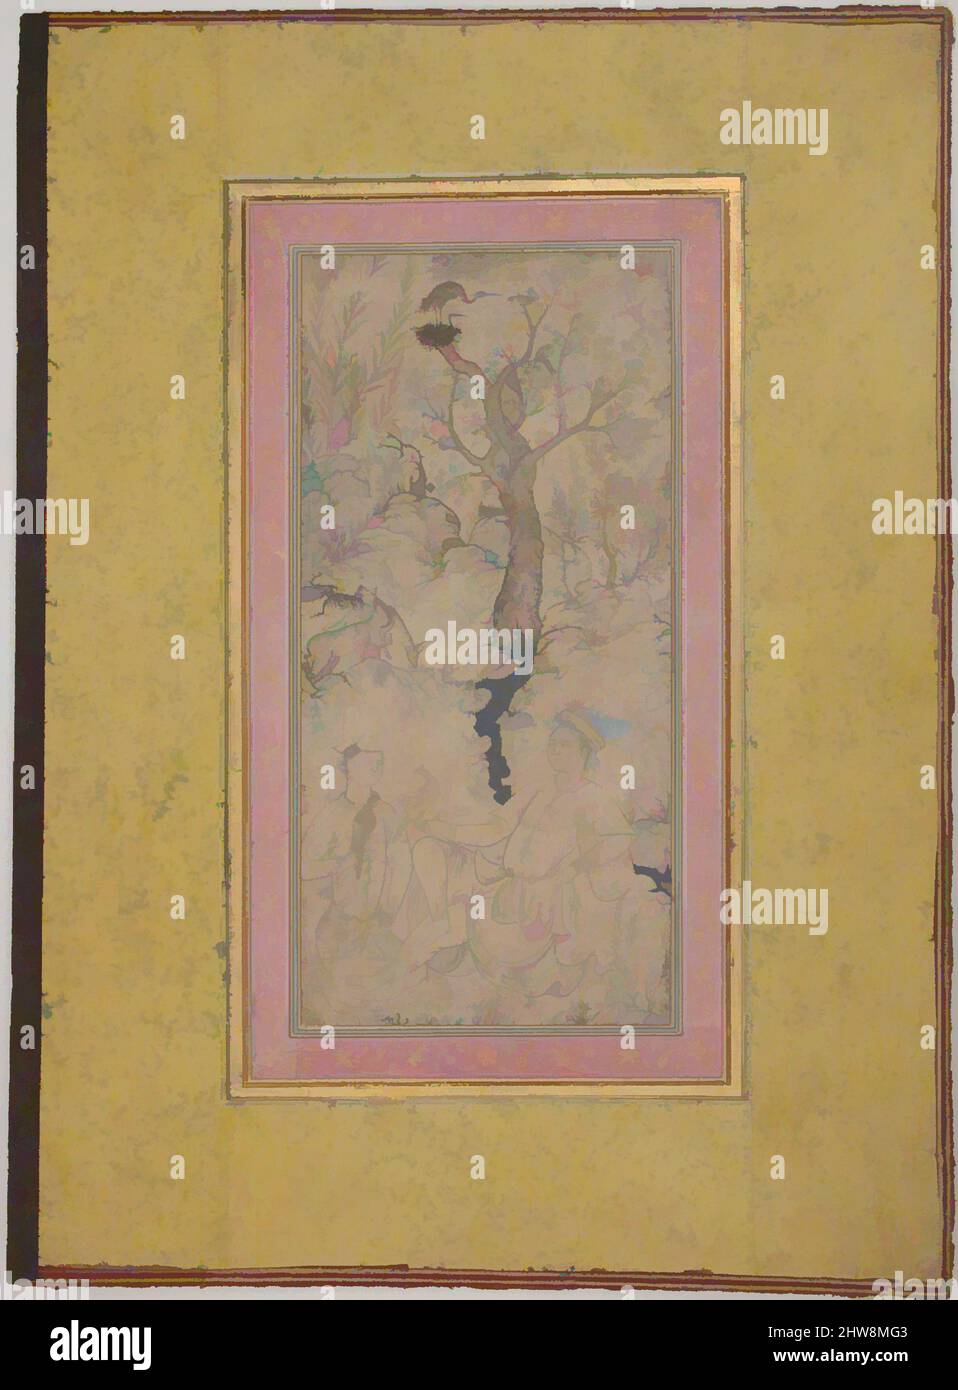 Art inspired by Youthful Falconers in a Landscape, second half 16th century, Attributed to Iran, Ink, transparent and opaque watercolor, silver, and gold on paper, H. 6 3/4 in. (17.2 cm), Codices, Classic works modernized by Artotop with a splash of modernity. Shapes, color and value, eye-catching visual impact on art. Emotions through freedom of artworks in a contemporary way. A timeless message pursuing a wildly creative new direction. Artists turning to the digital medium and creating the Artotop NFT Stock Photo